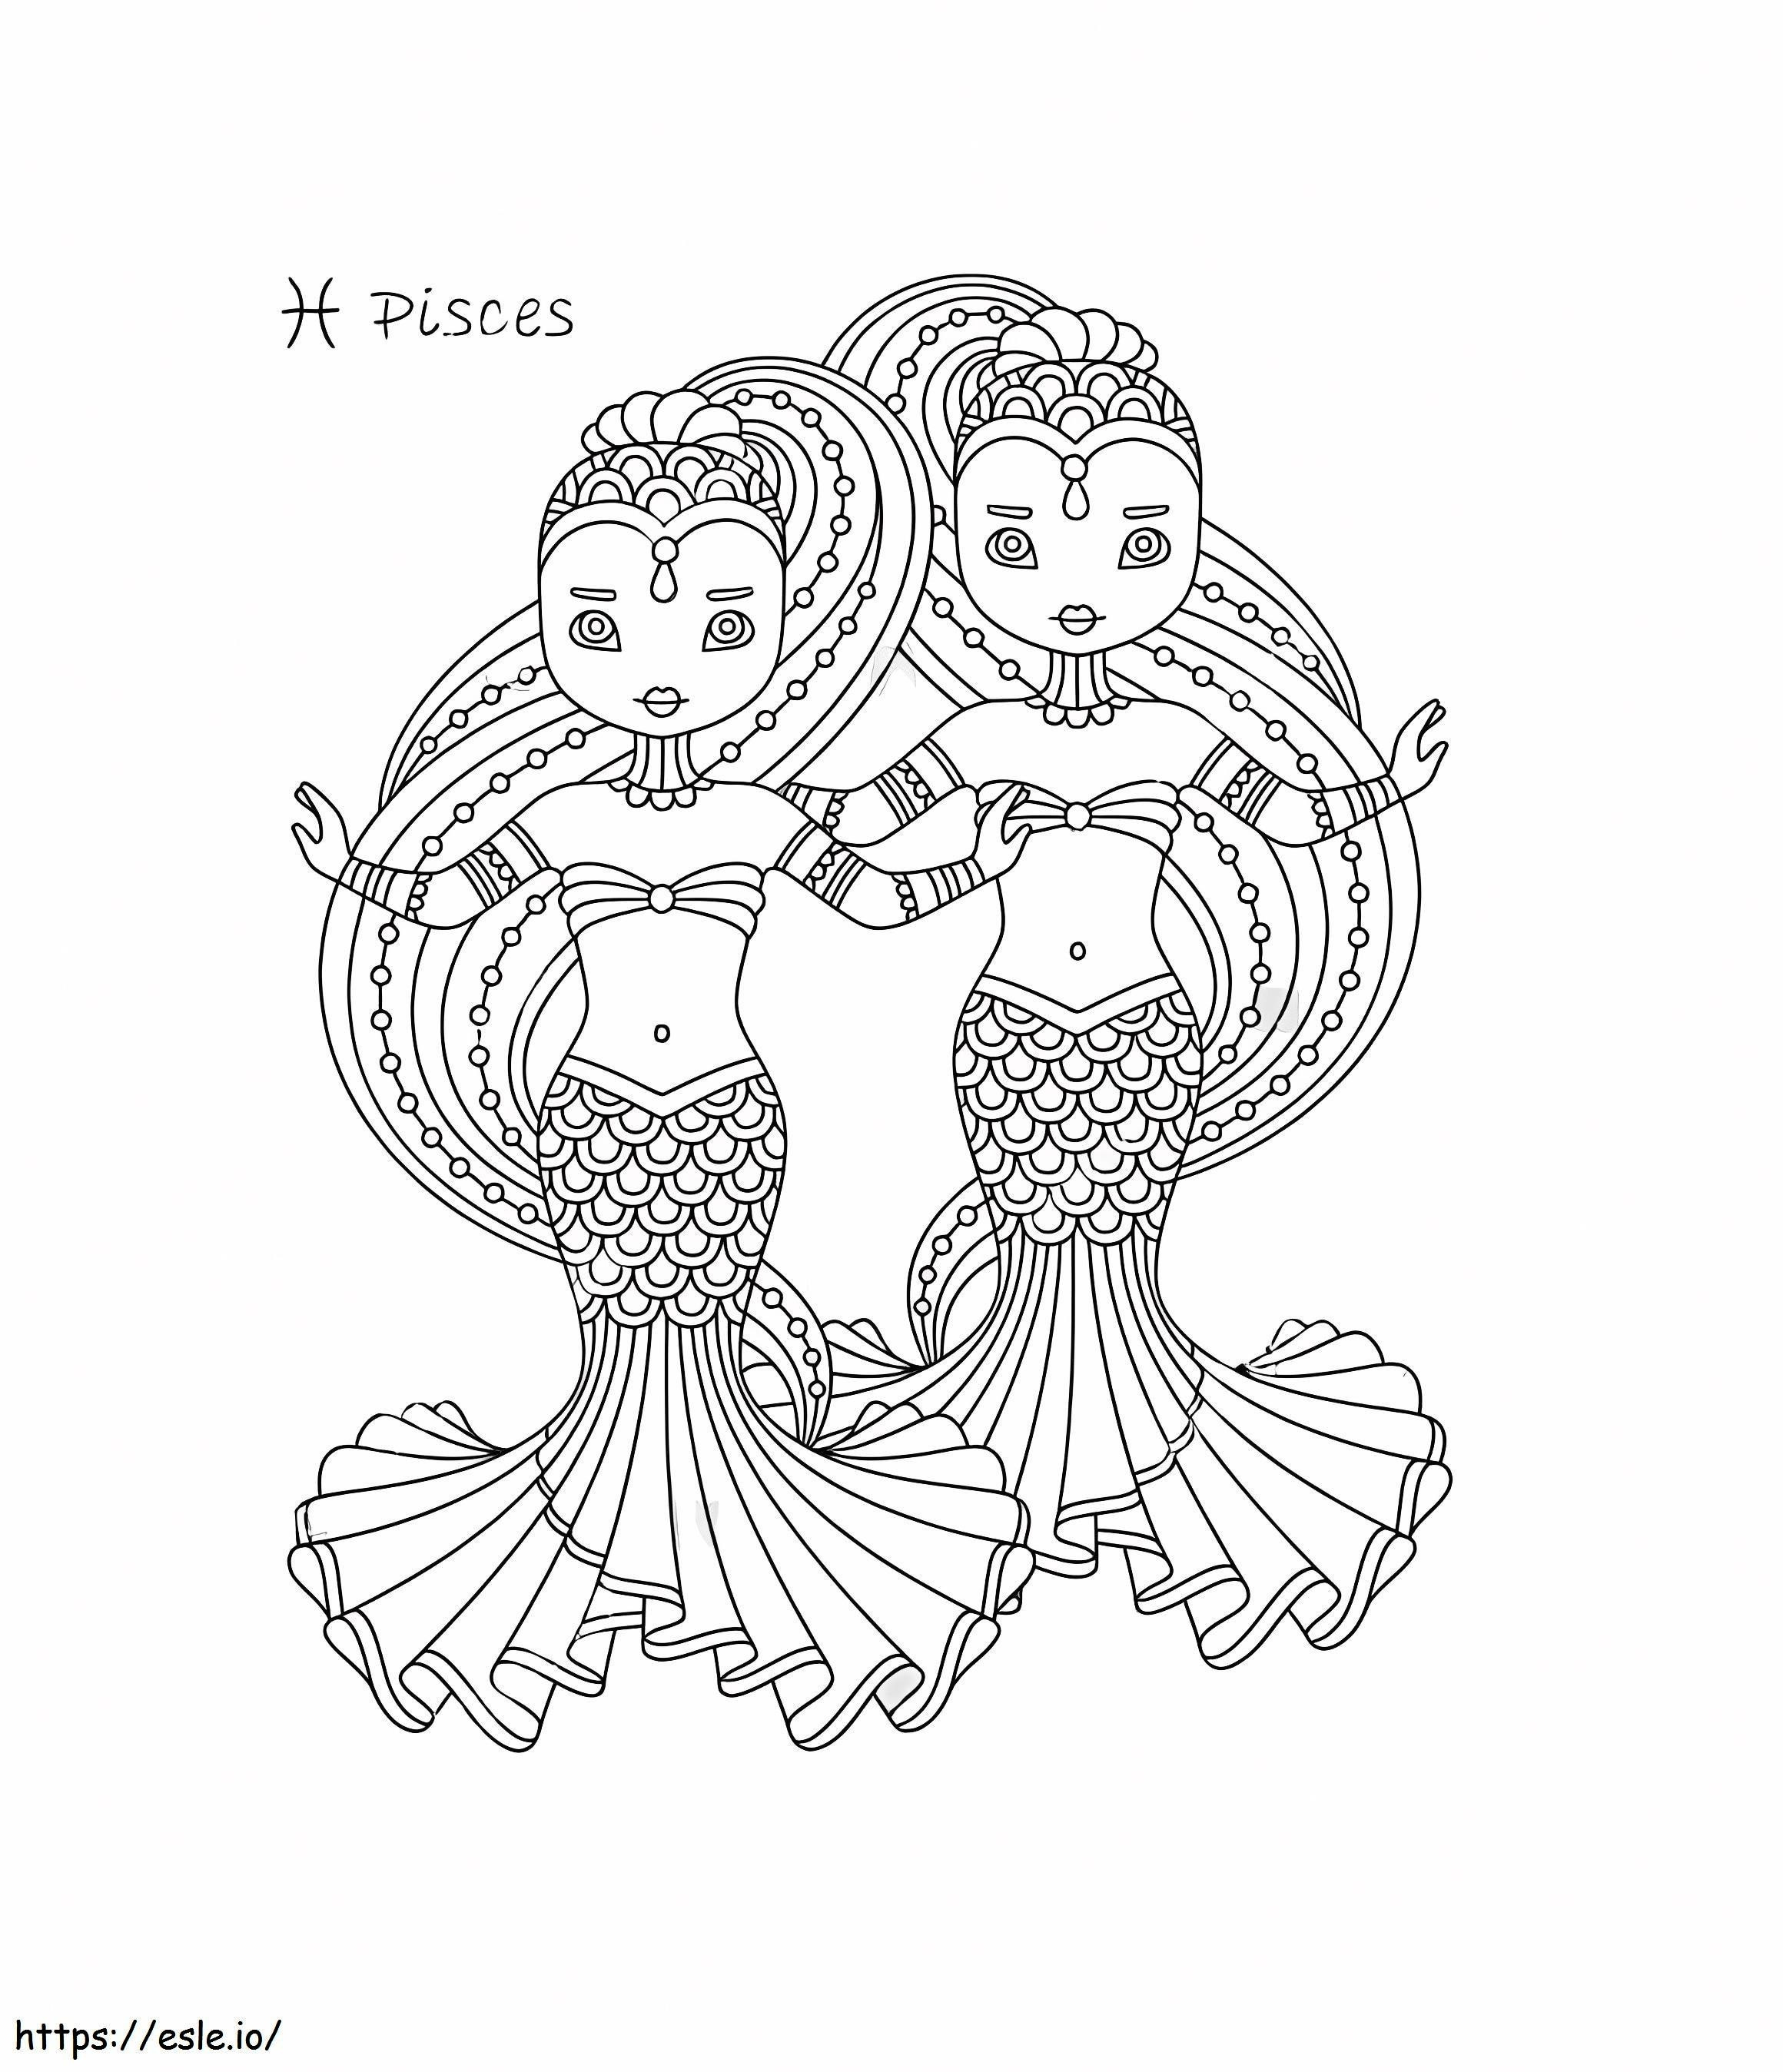 Pisces Girls Symbol coloring page